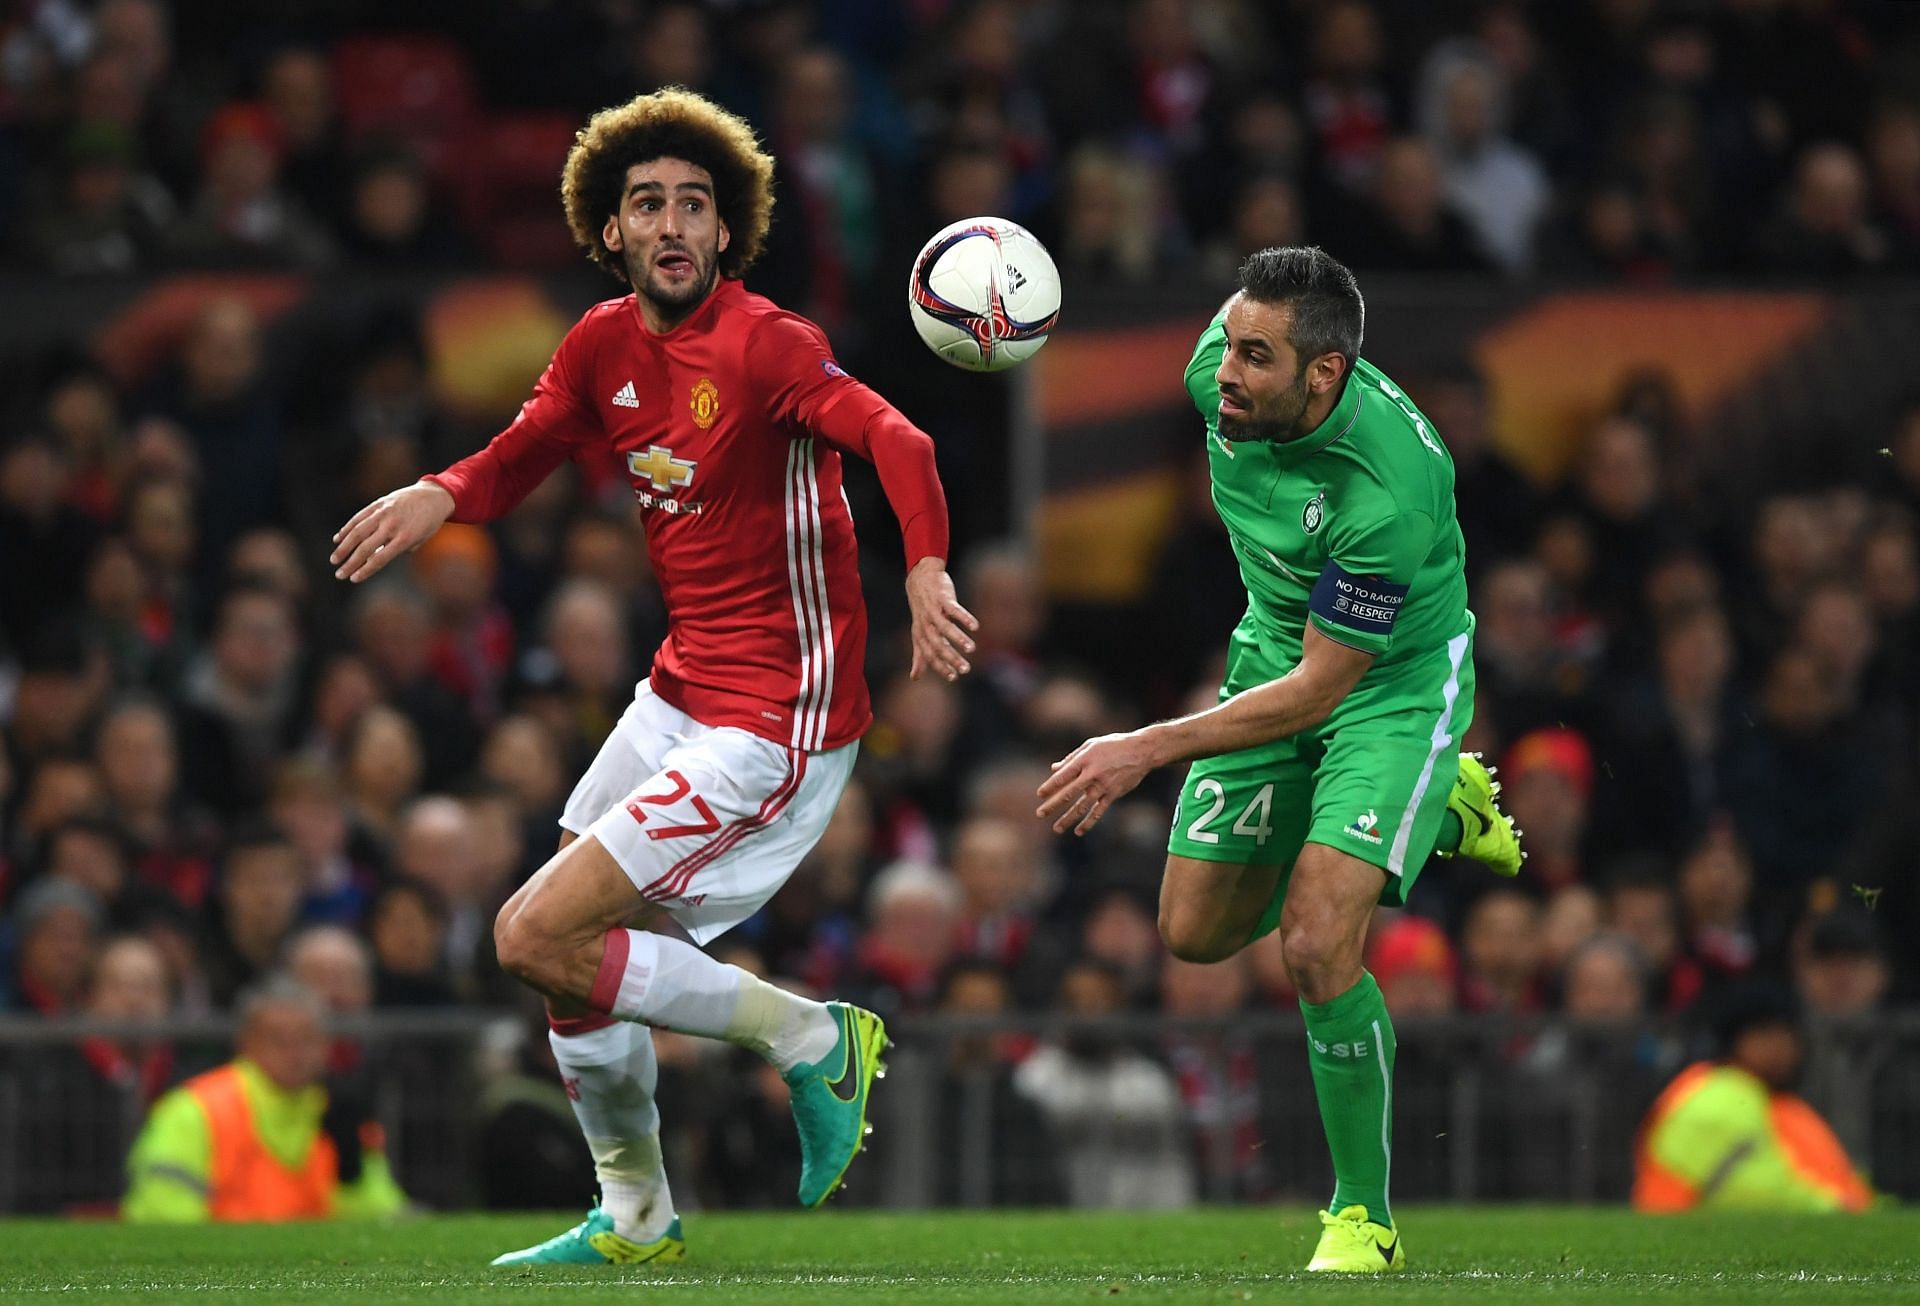 Marouane Fellaini and Loic Perrin (right) fight for the ball